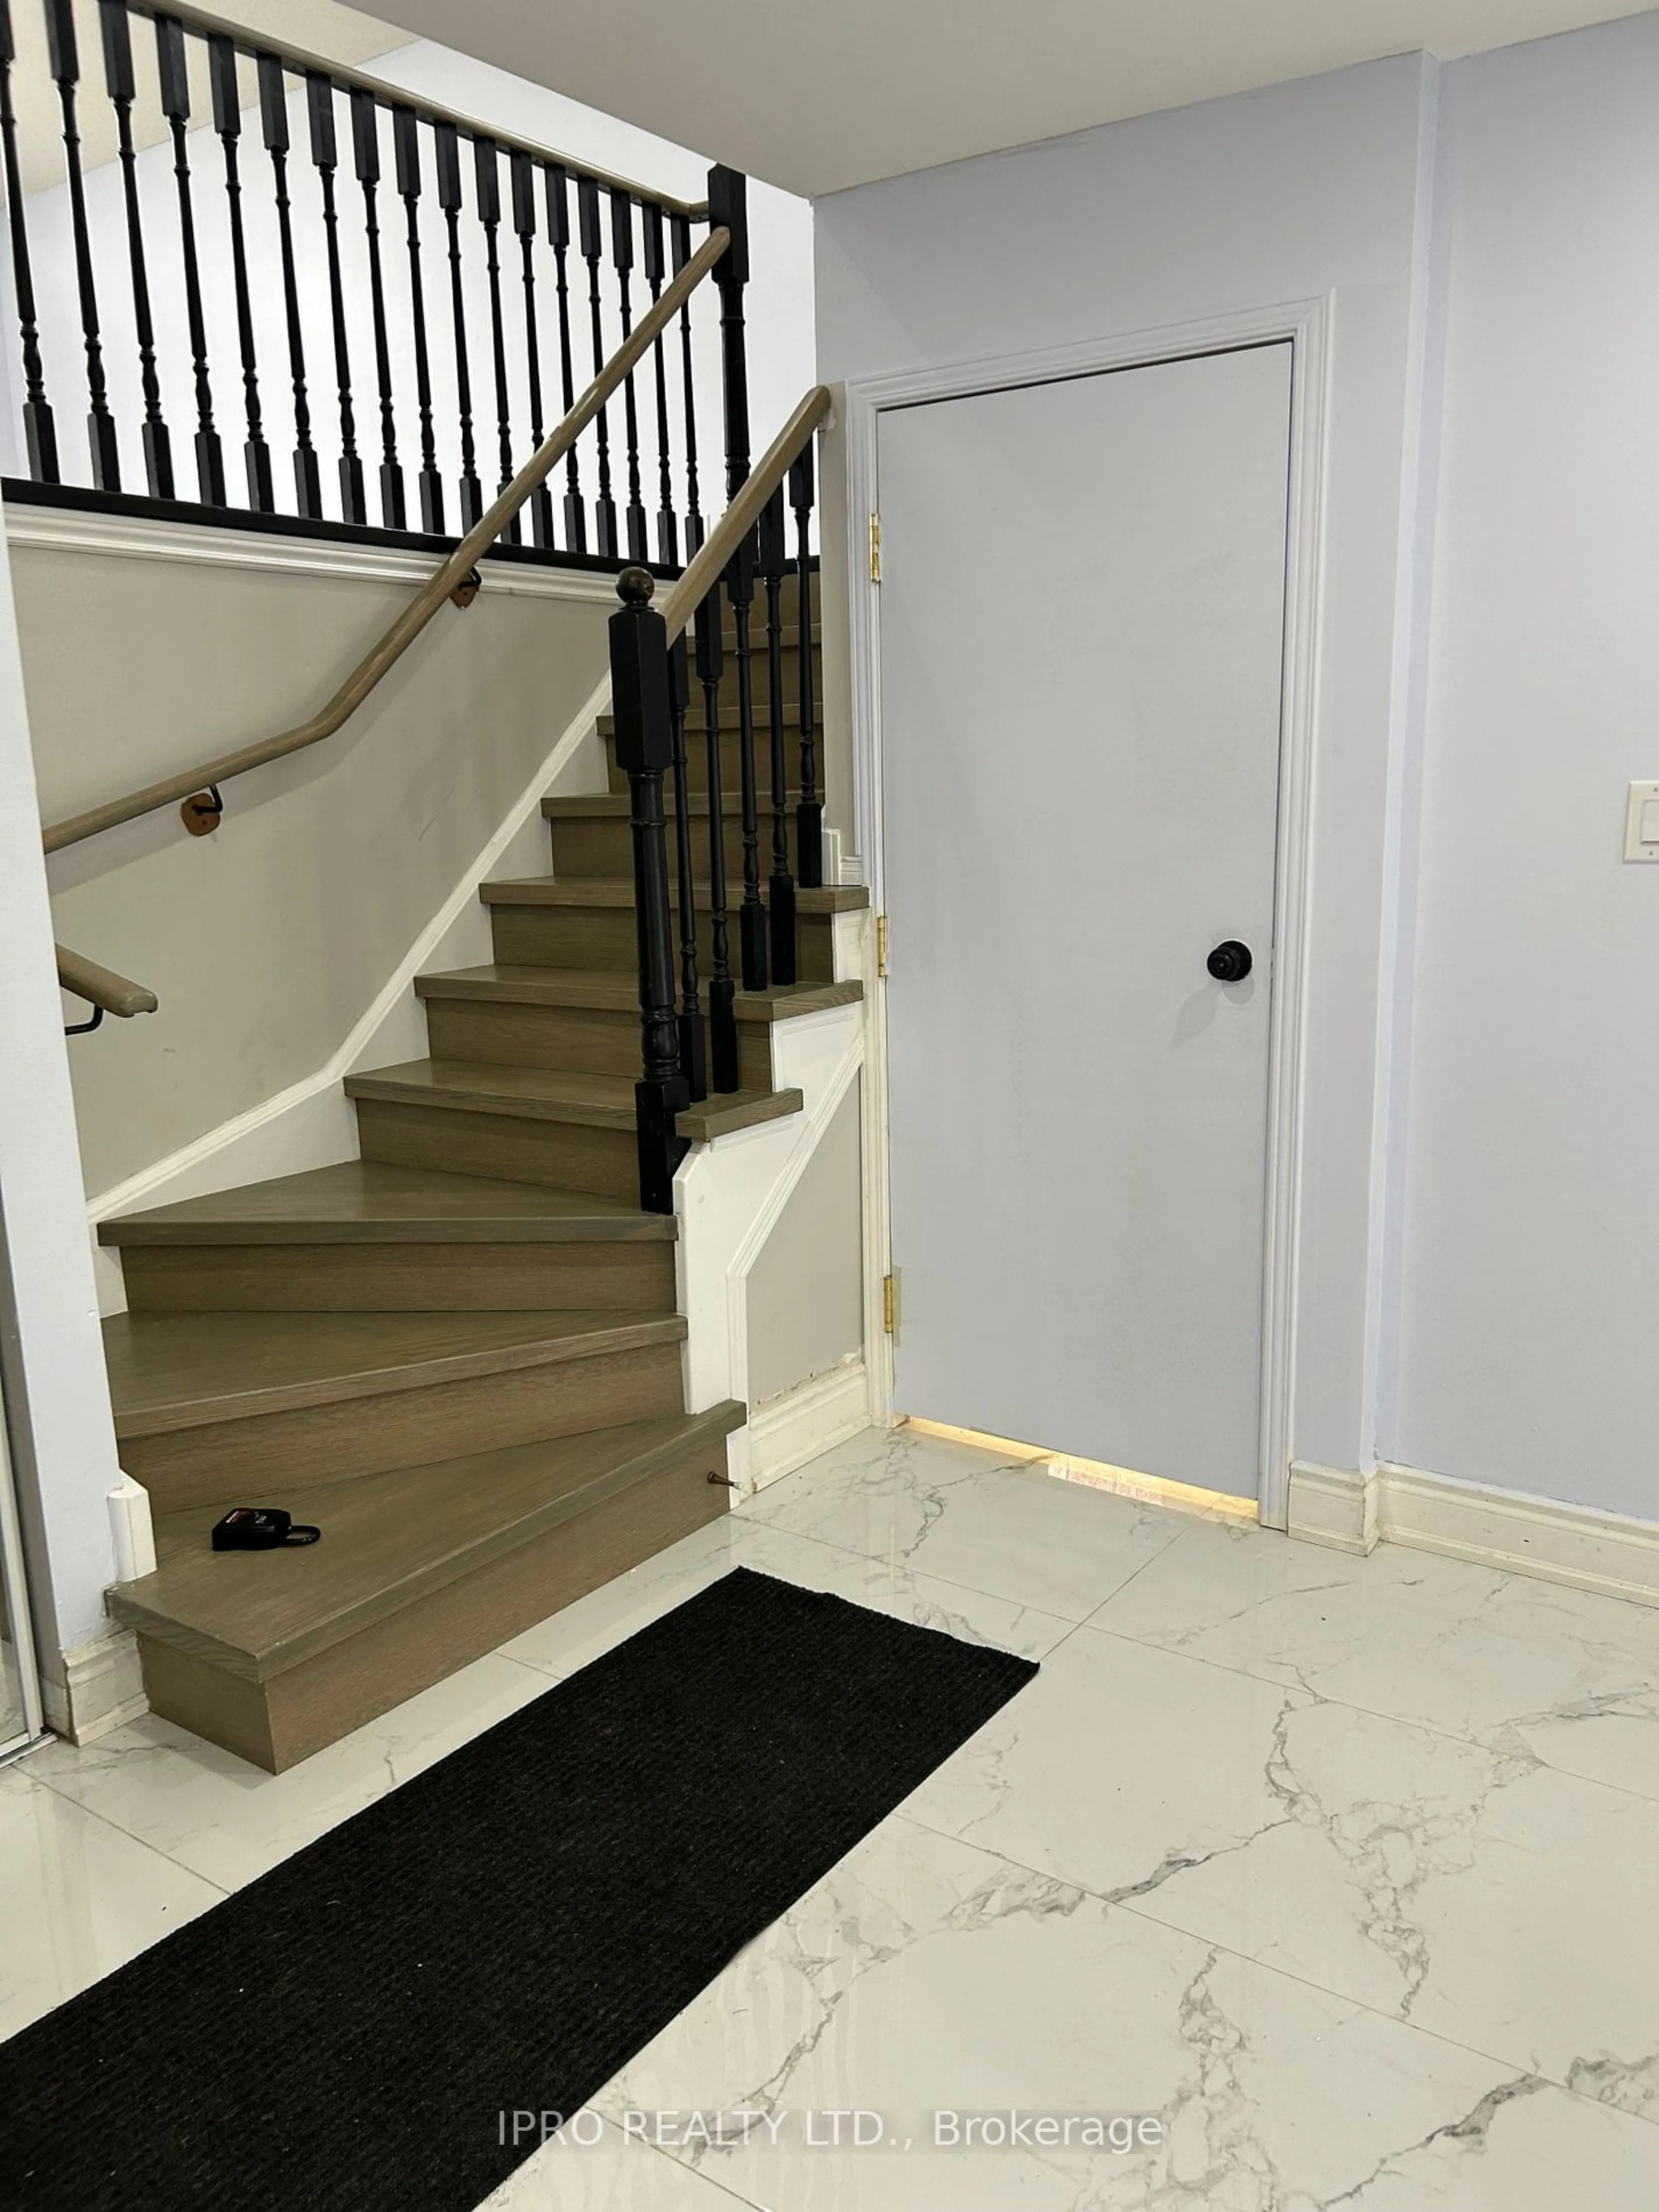 Stairs for 3833 Althorpe Circ, Mississauga Ontario L5N 7G3